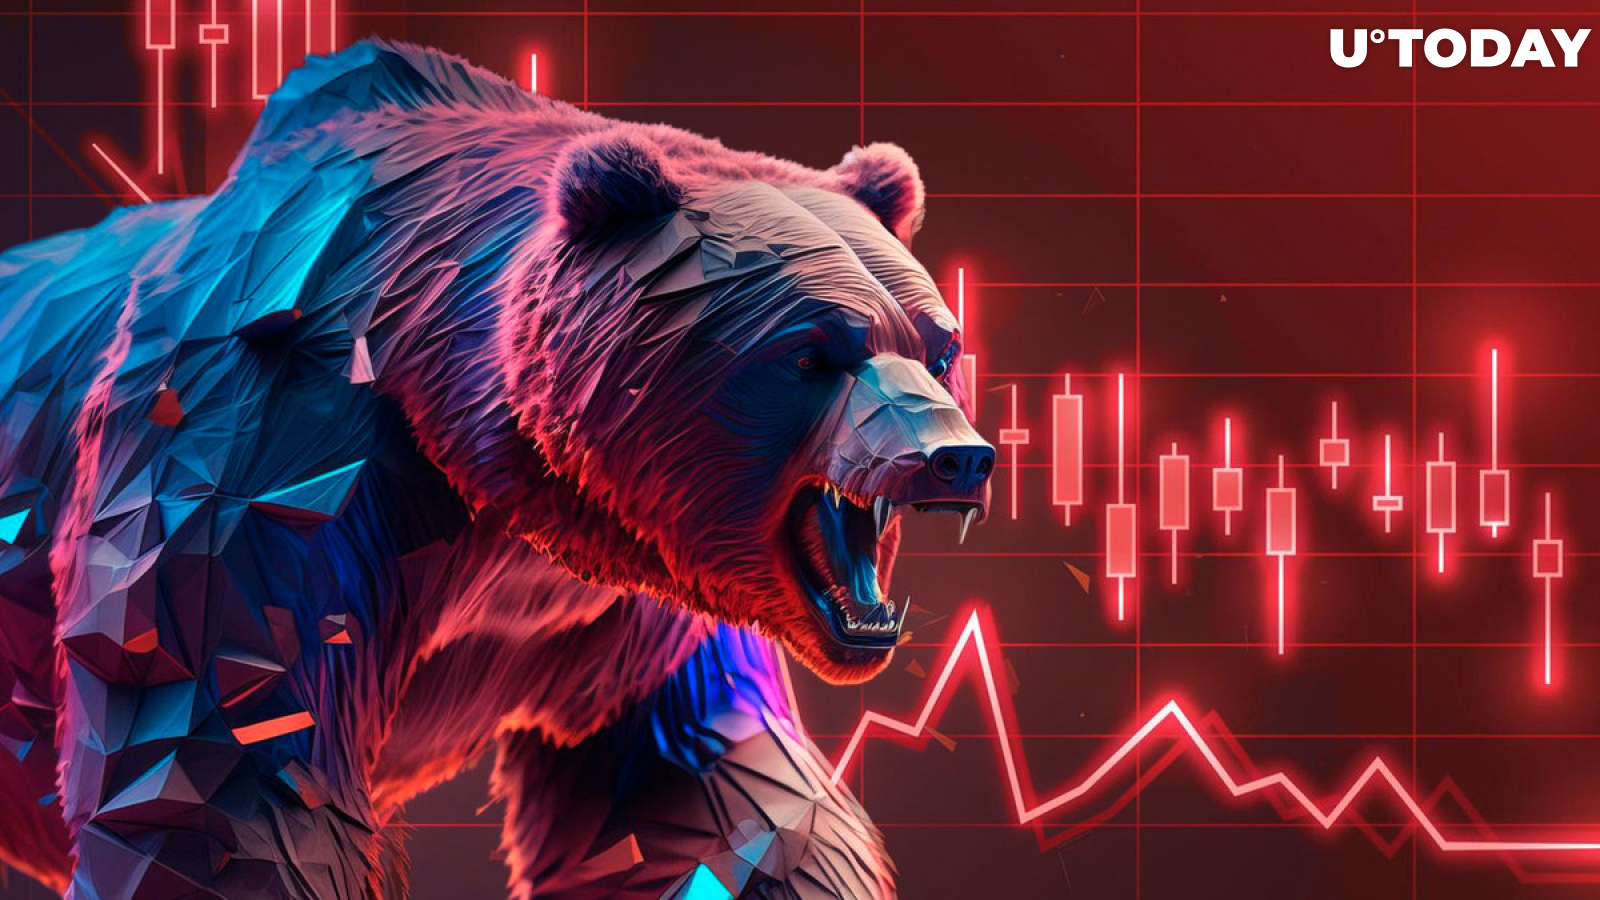 $100 Million in Crypto Shorts Destroyed Completely as Bears Lose Their Ground